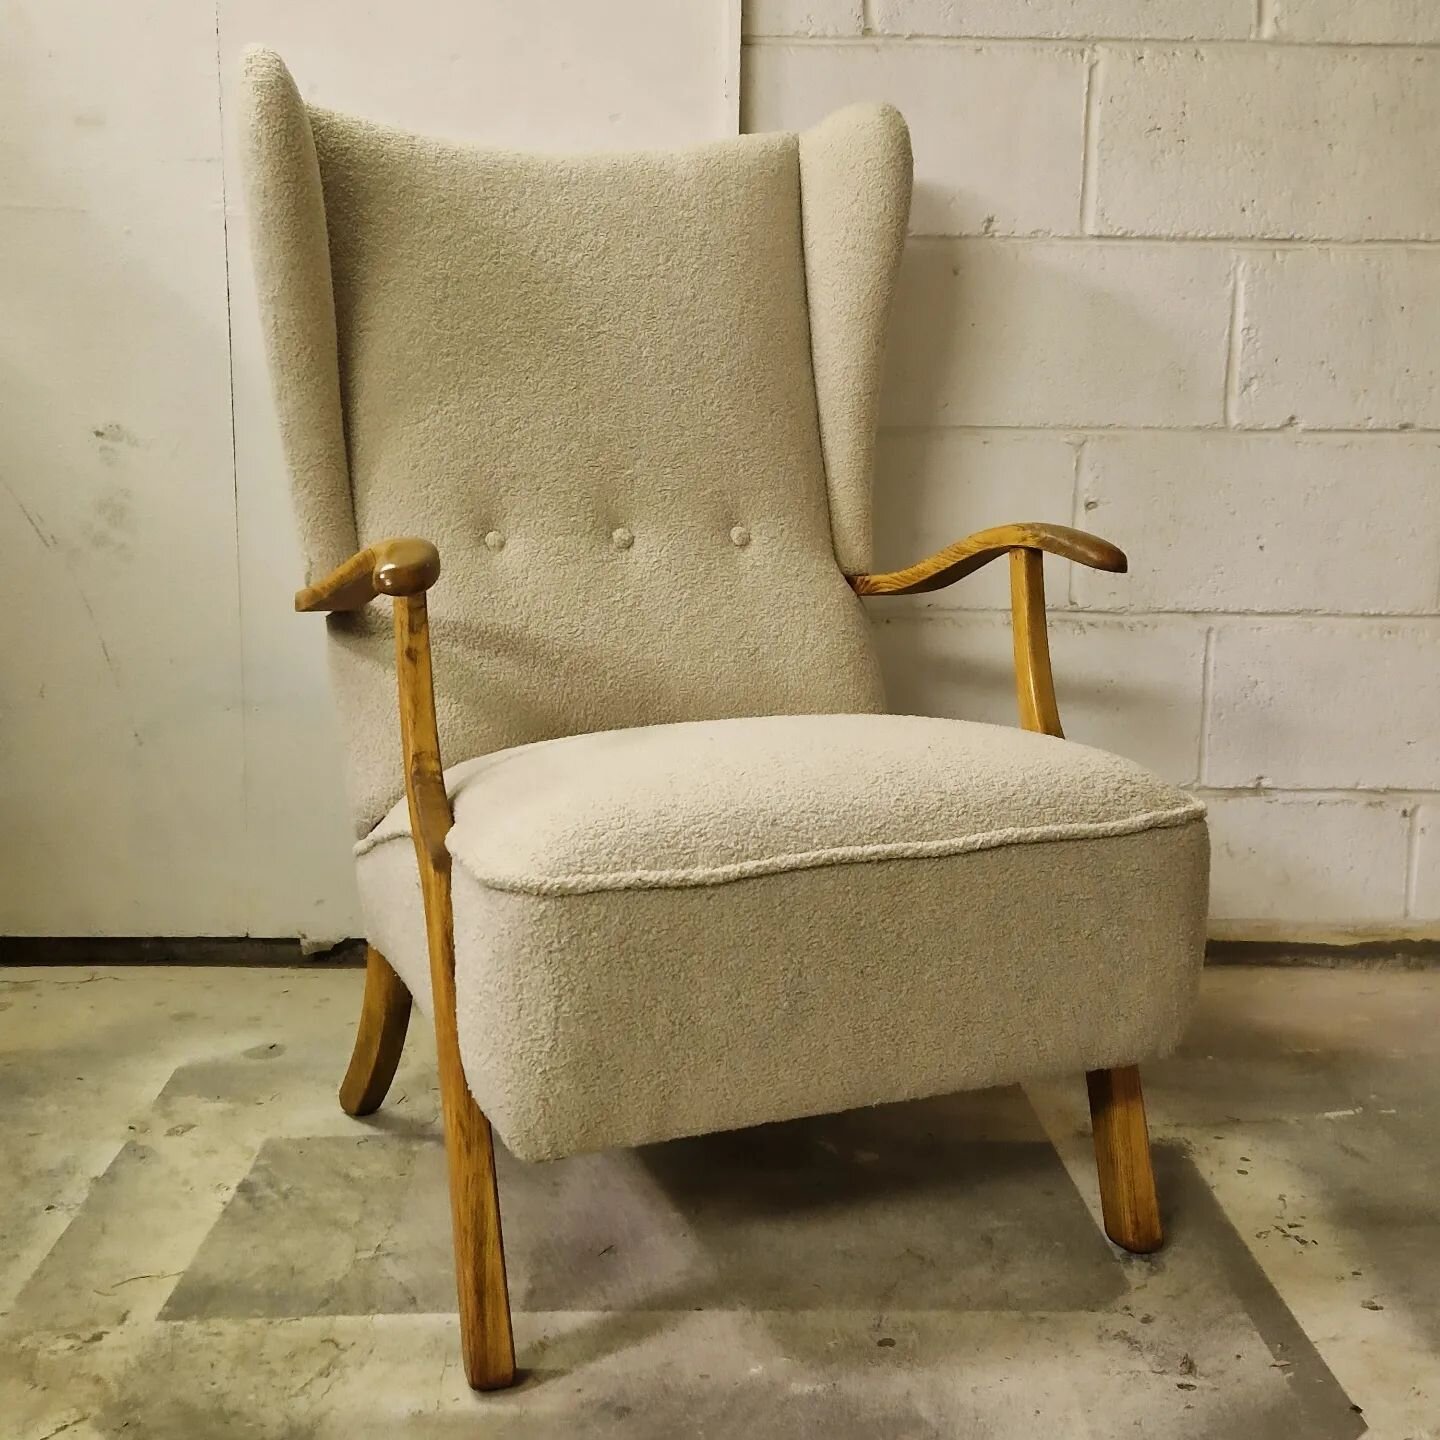 Available soon on leosinteriors.co.uk! This mid century Danish armchair has been restored and upholstered in latte boucl&egrave; fabric. Get in touch for more details.

Swipe left for before restoration.
.
.
.
#Restoration #boucle #furniture #vintage